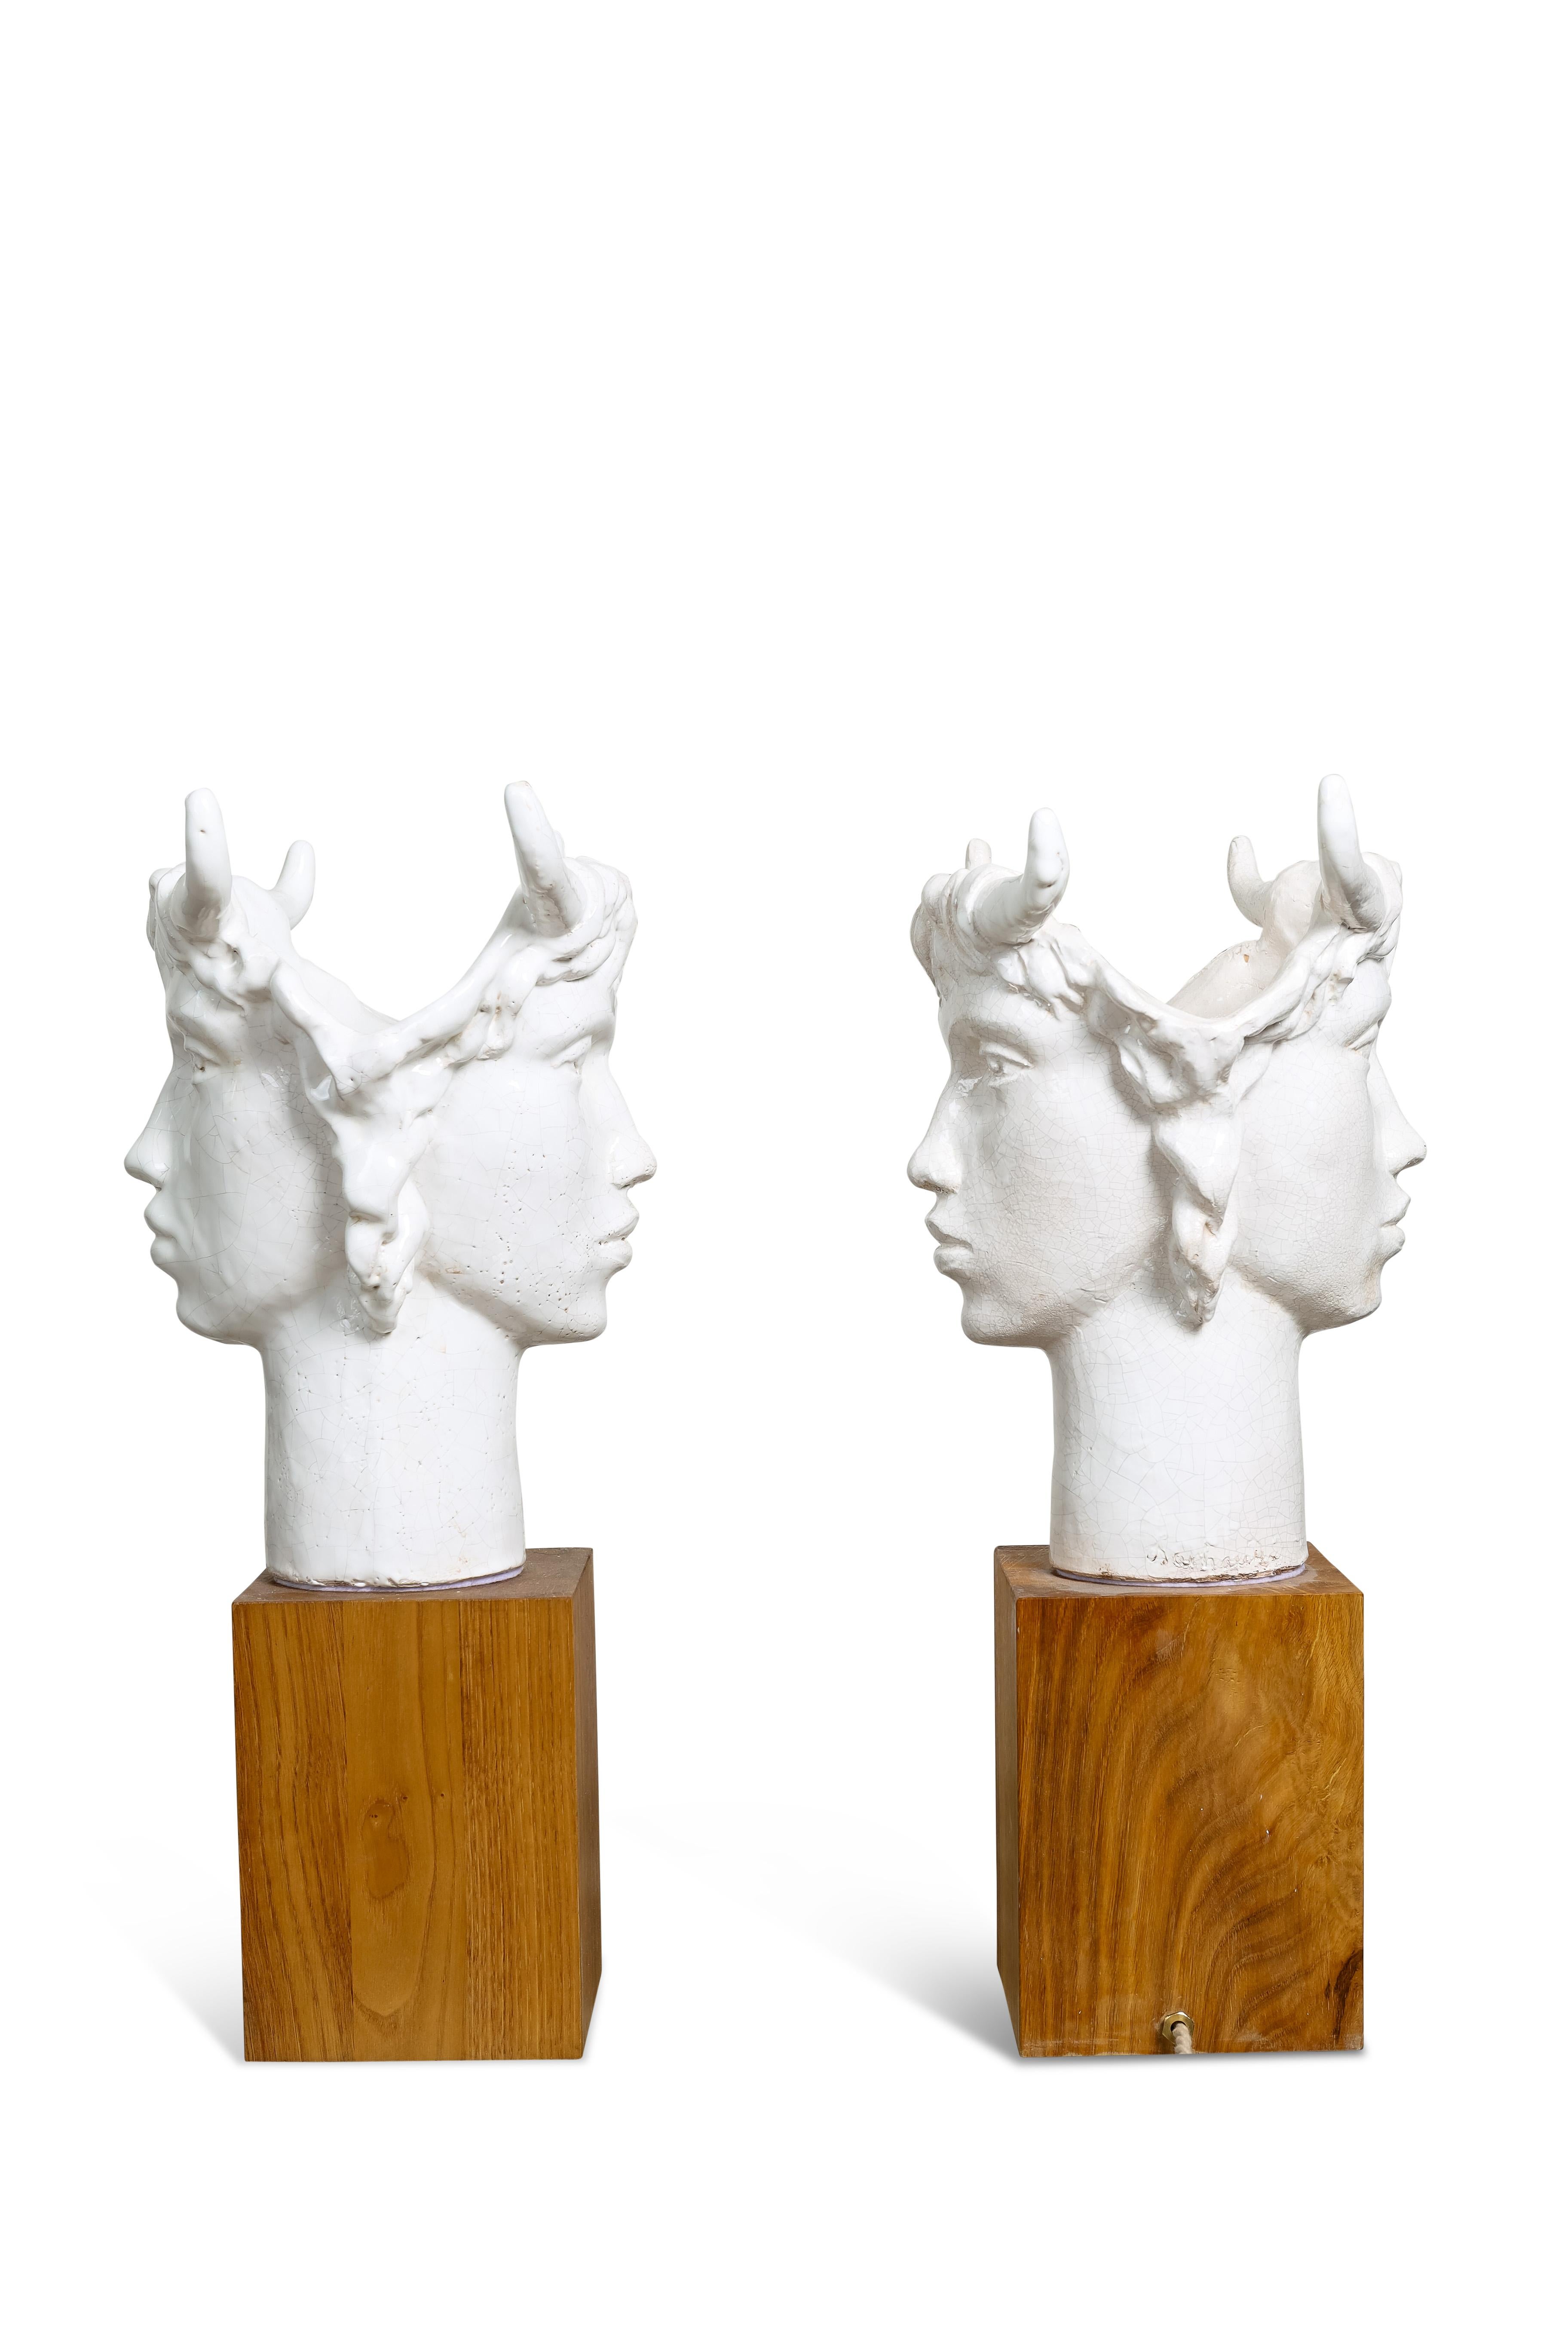 Jacques Darbaud Spectacular Pair of Janus Ceramic Lamps In Excellent Condition For Sale In Jersey City, NJ